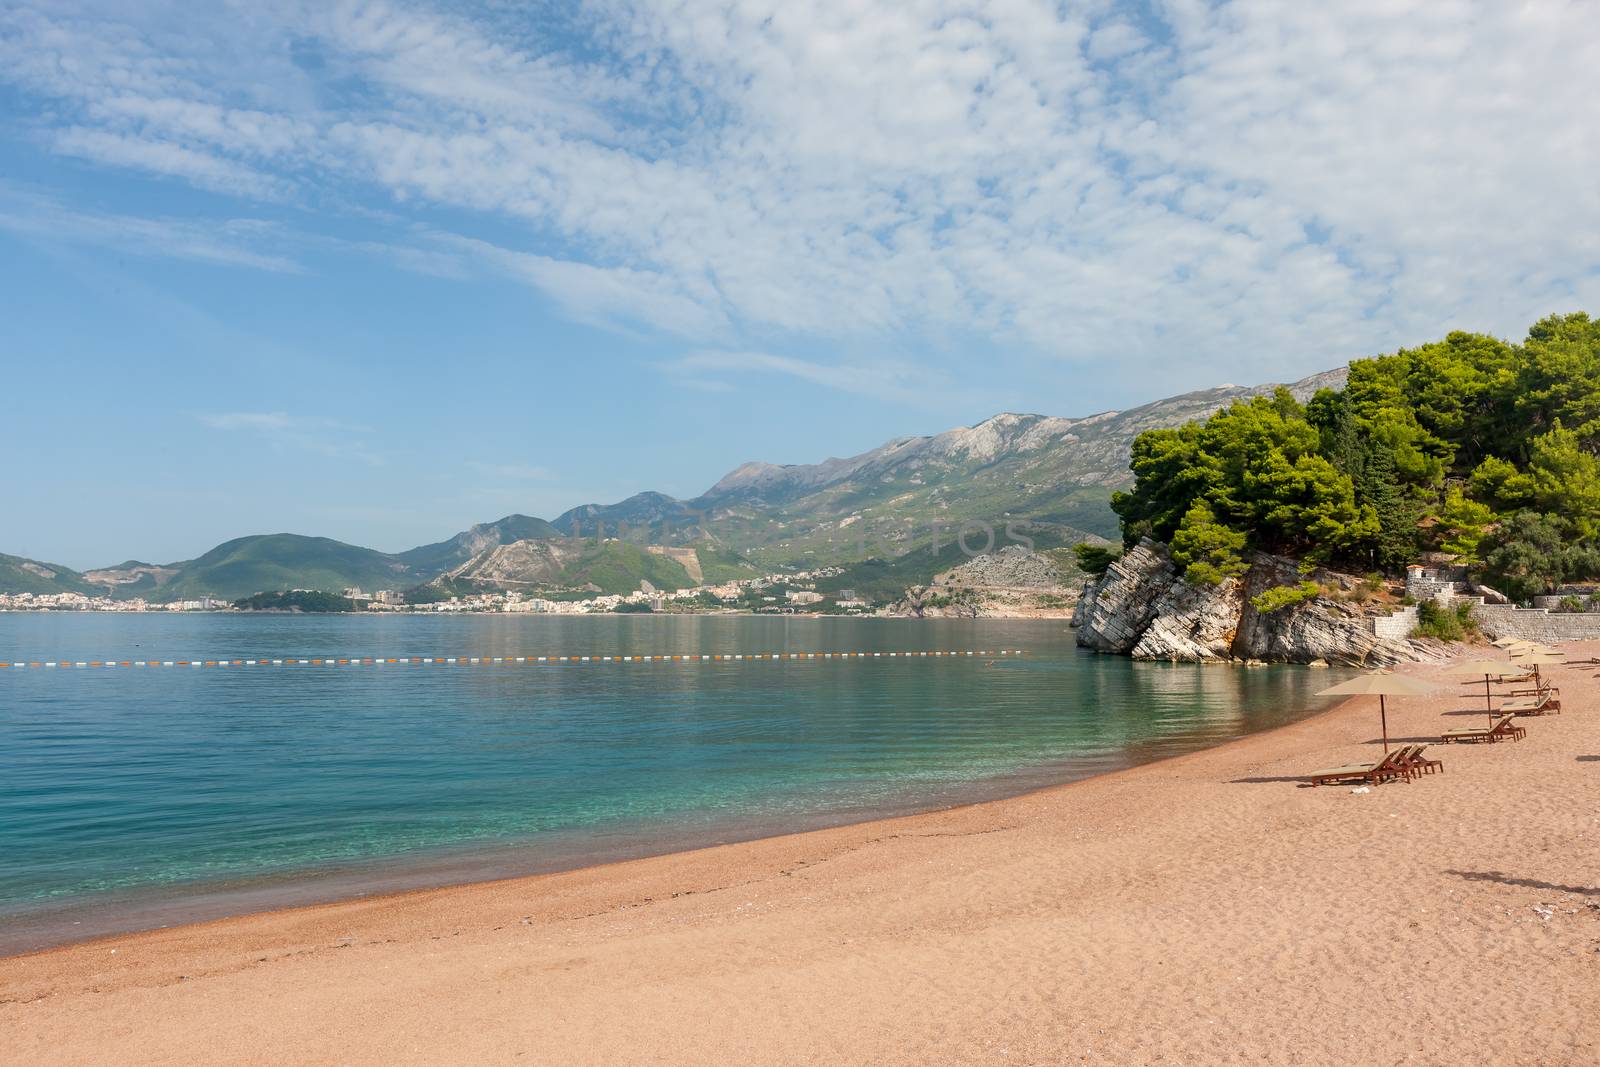 Royal beach of Montenegro by master1305